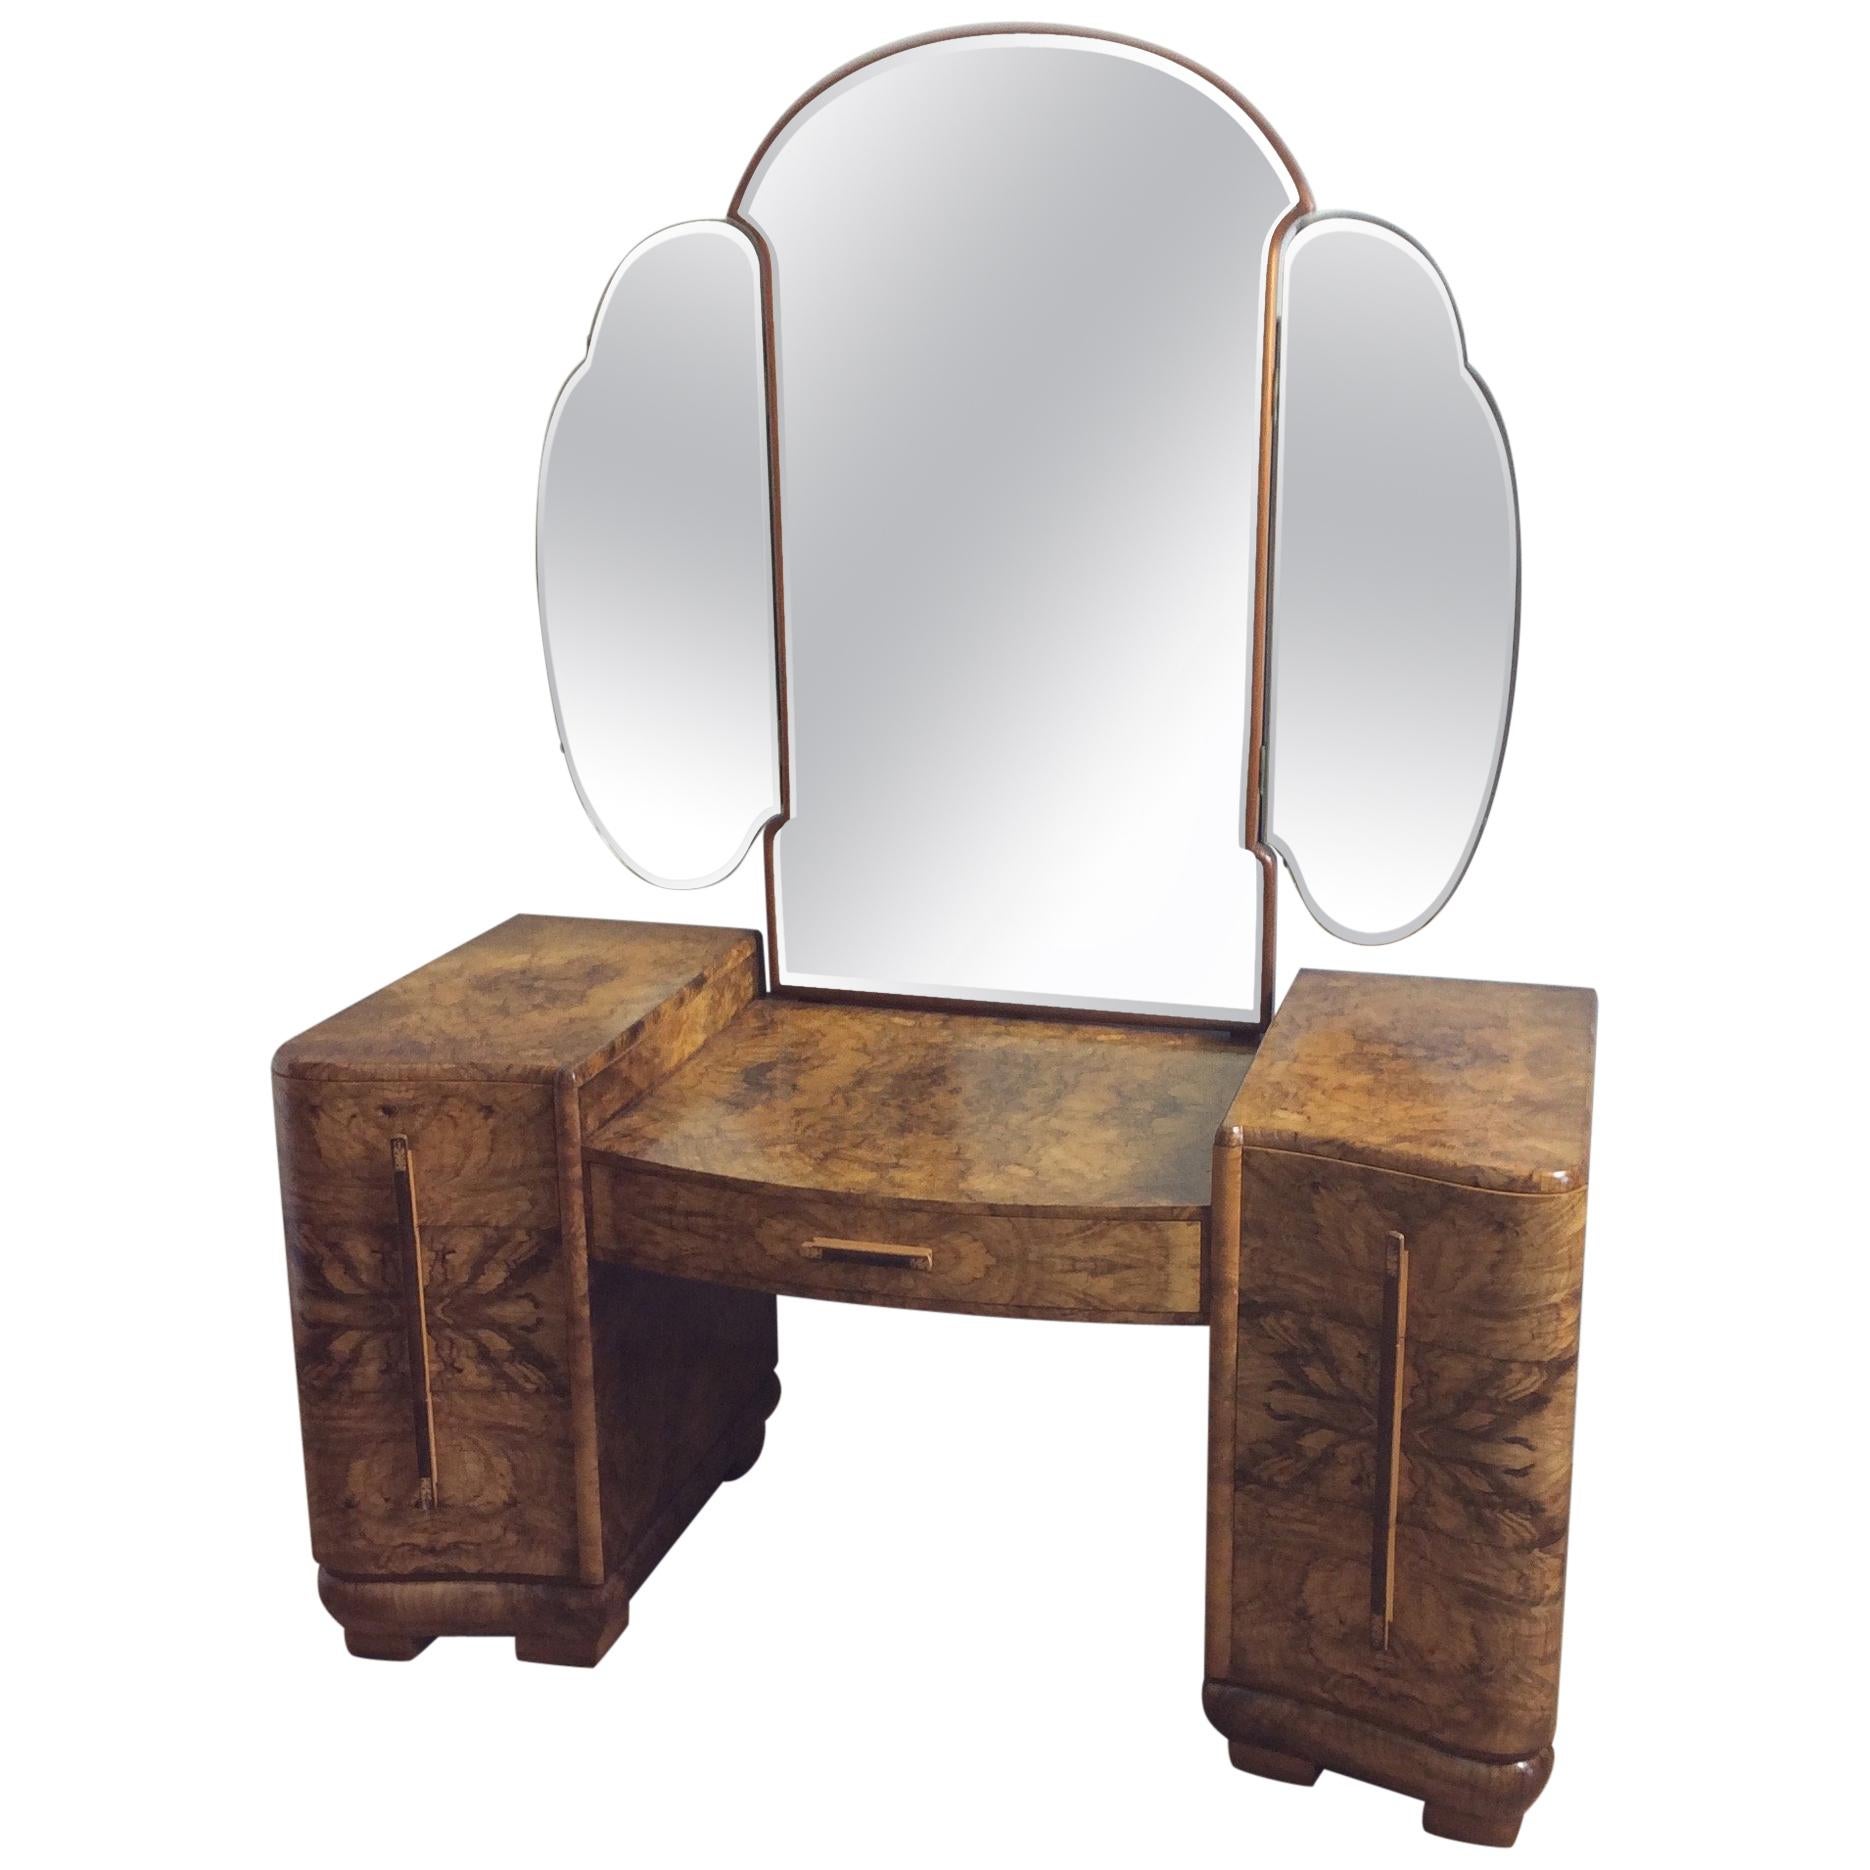 Art Deco Dressing Table with Cloud Shape Mirror